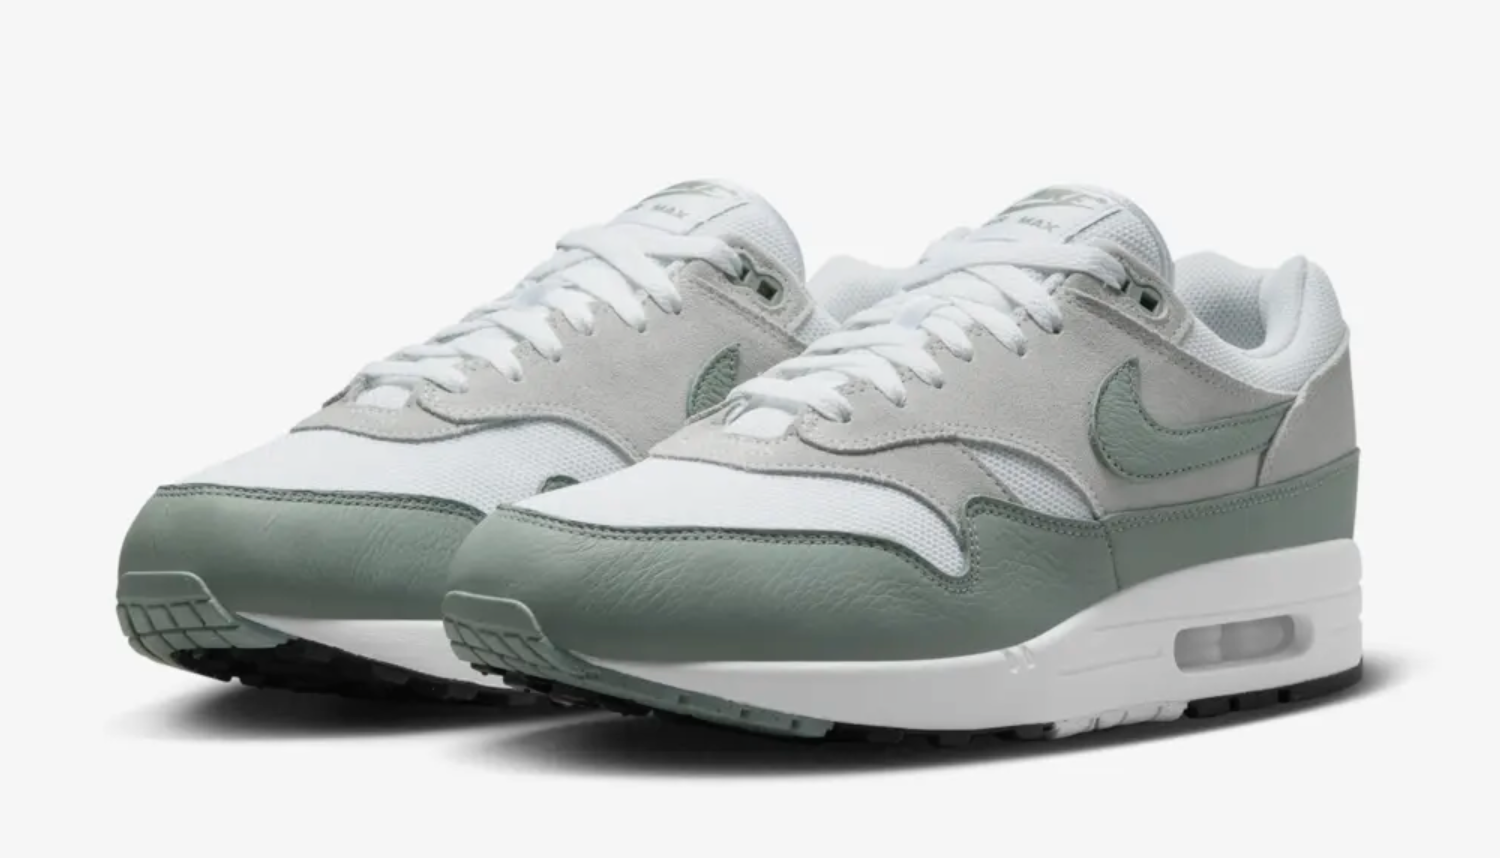 Nike Air Max 1 Mica Green Launching in India